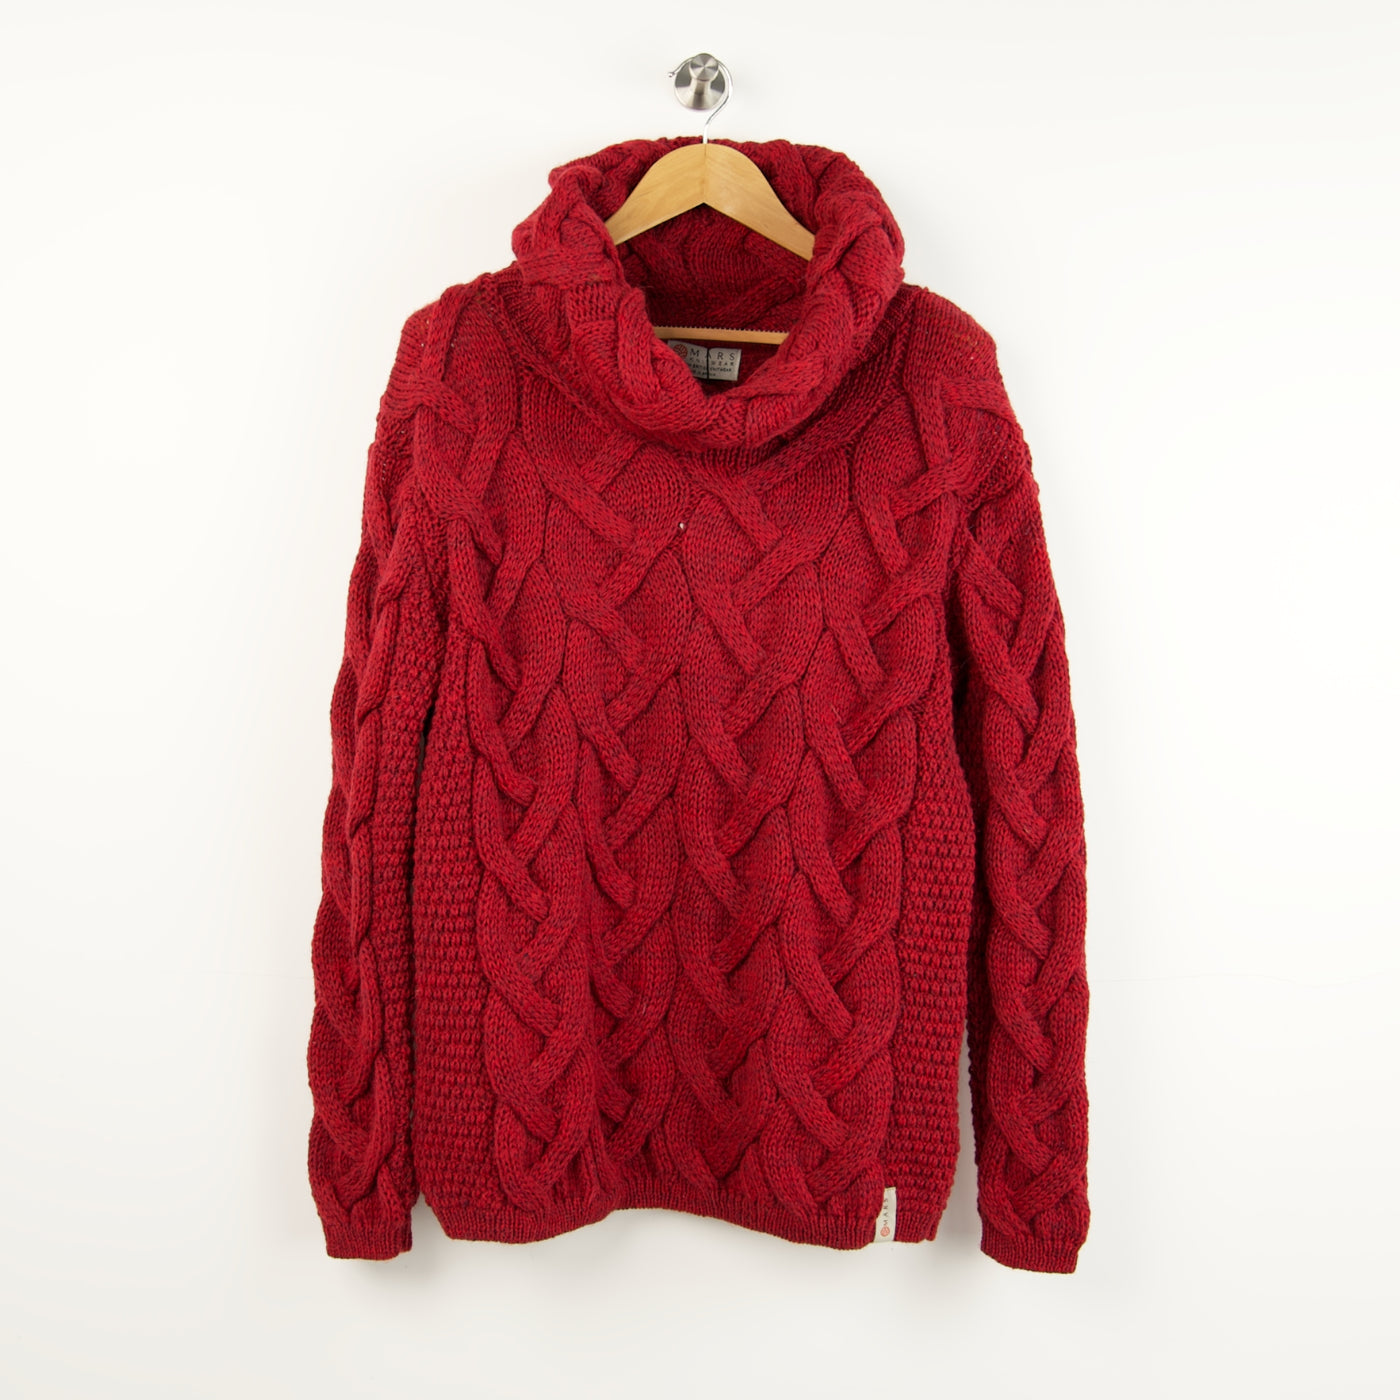 British Wool Chunky Cable Cowl Neck Jumper - Bordeaux